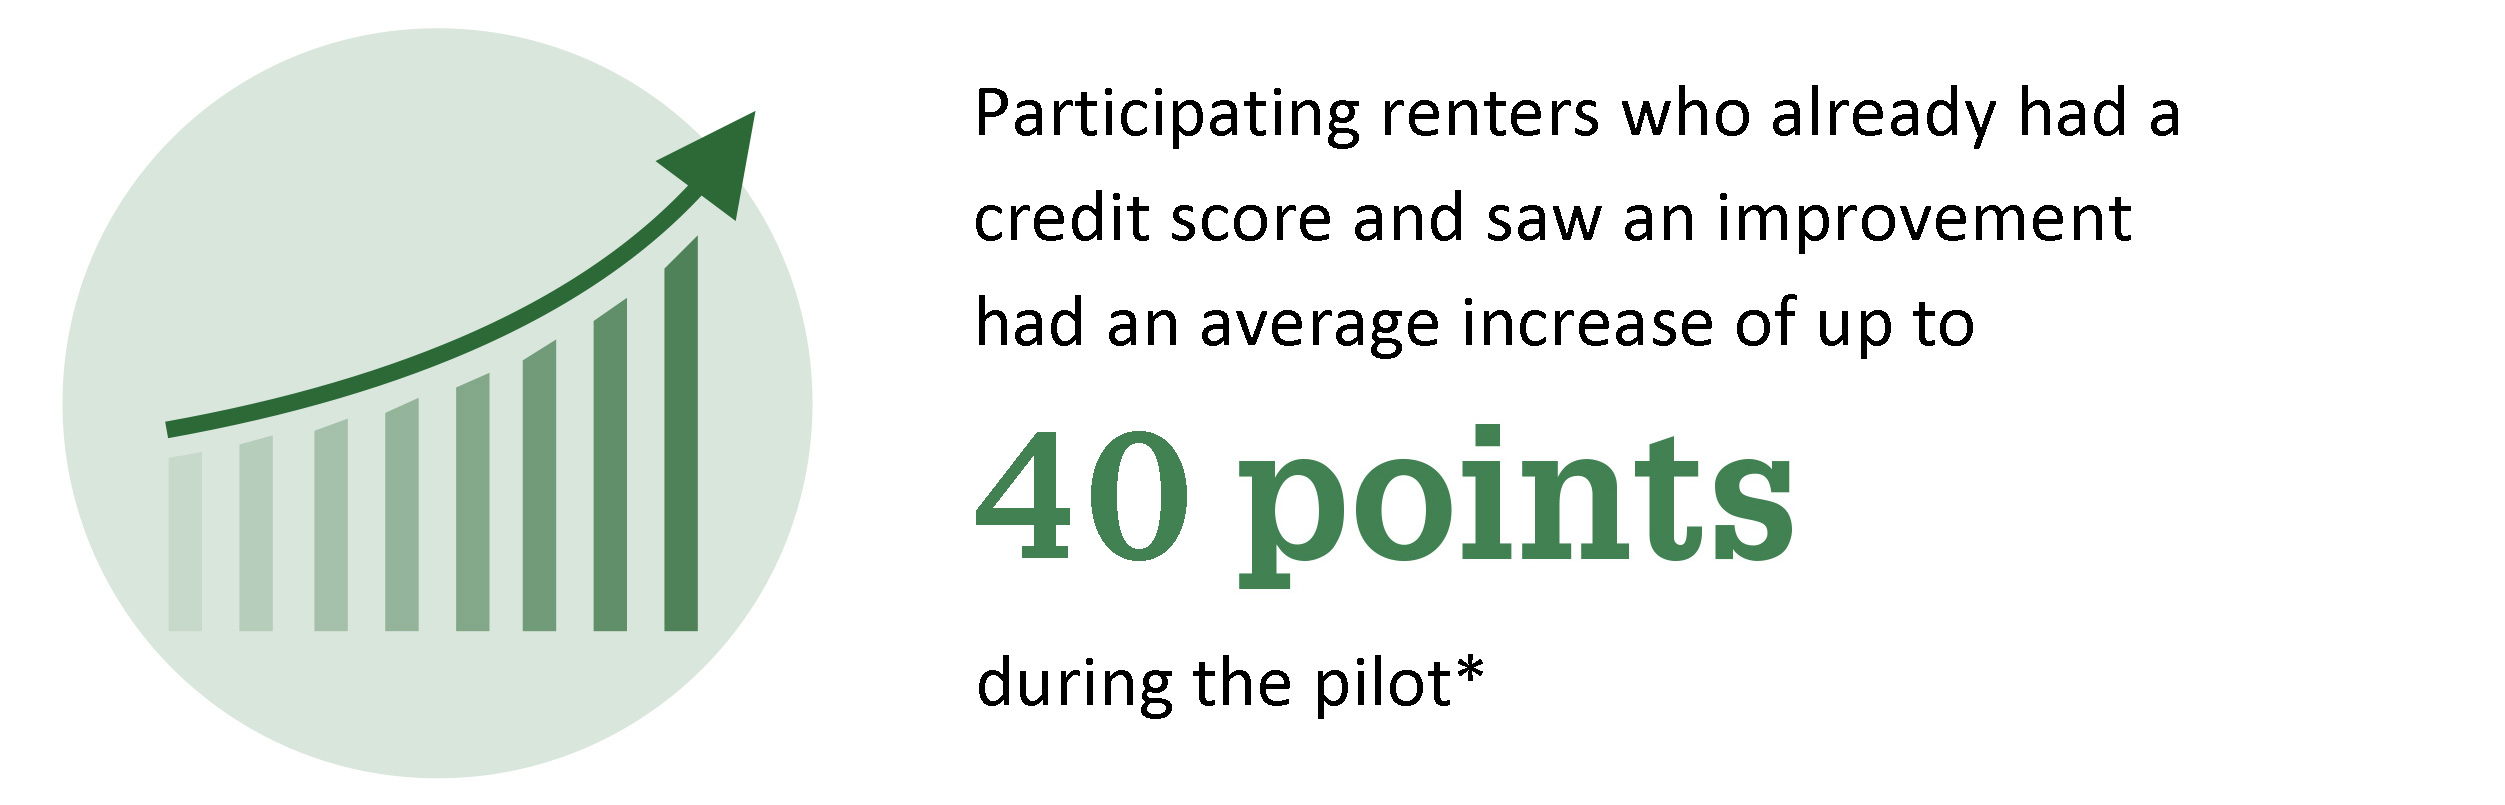 Participating renters who already had a credit score and saw an improvement had an average increase of up to 40 points during the pilot*